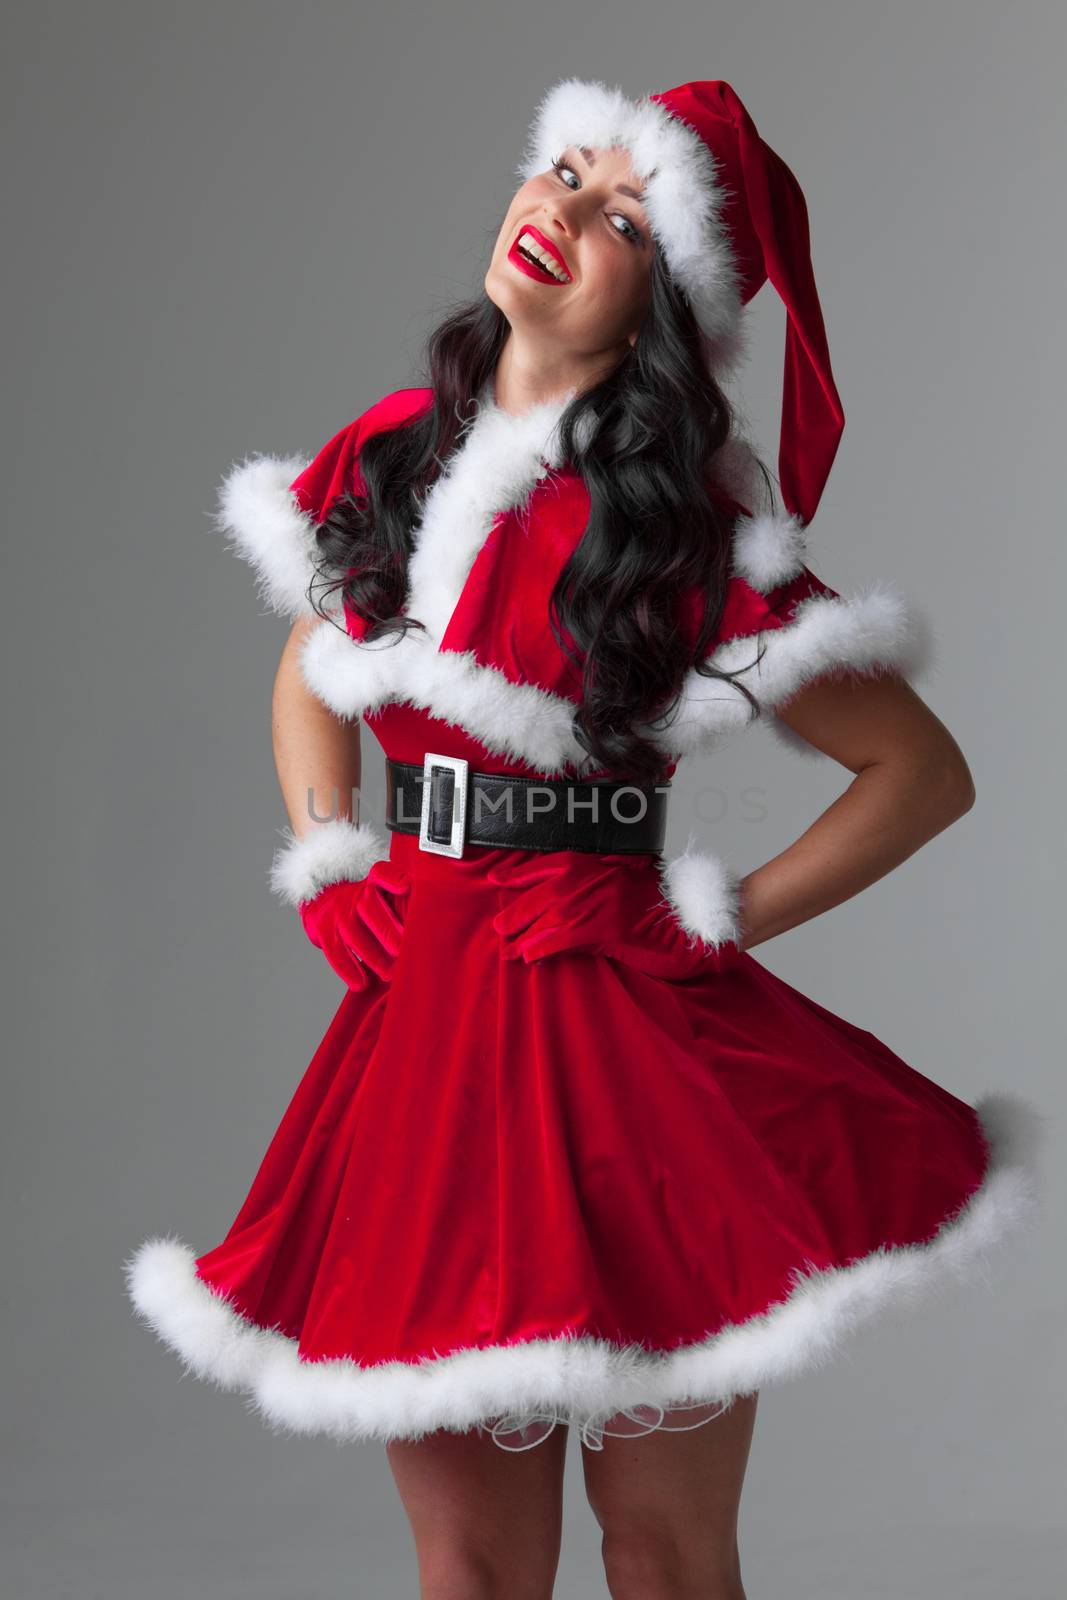 Portrait of beautiful sexy girl wearing santa claus clothes